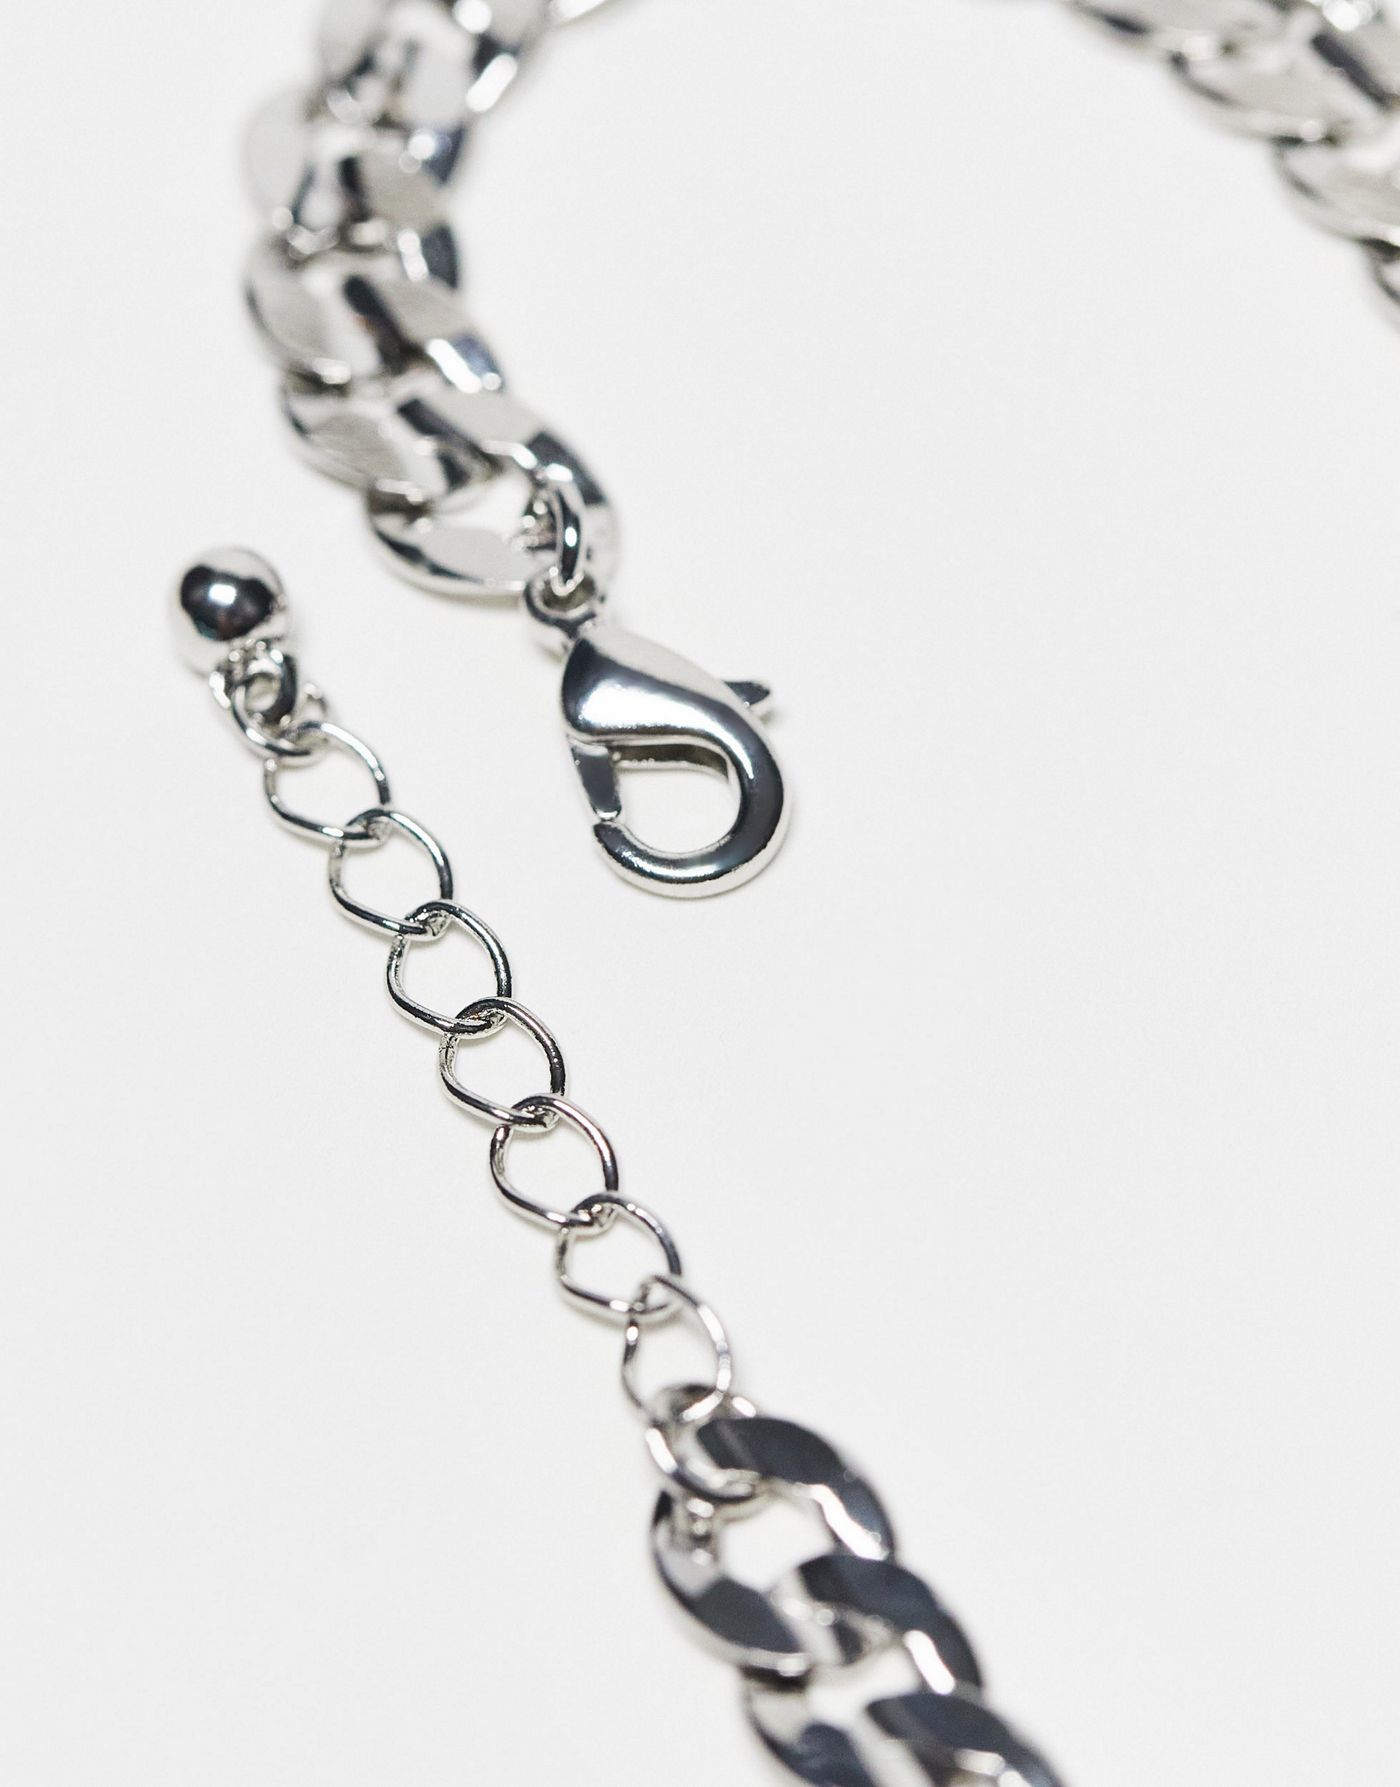 ASOS DESIGN 3 pack curb and flat chain bracelets in silver tone